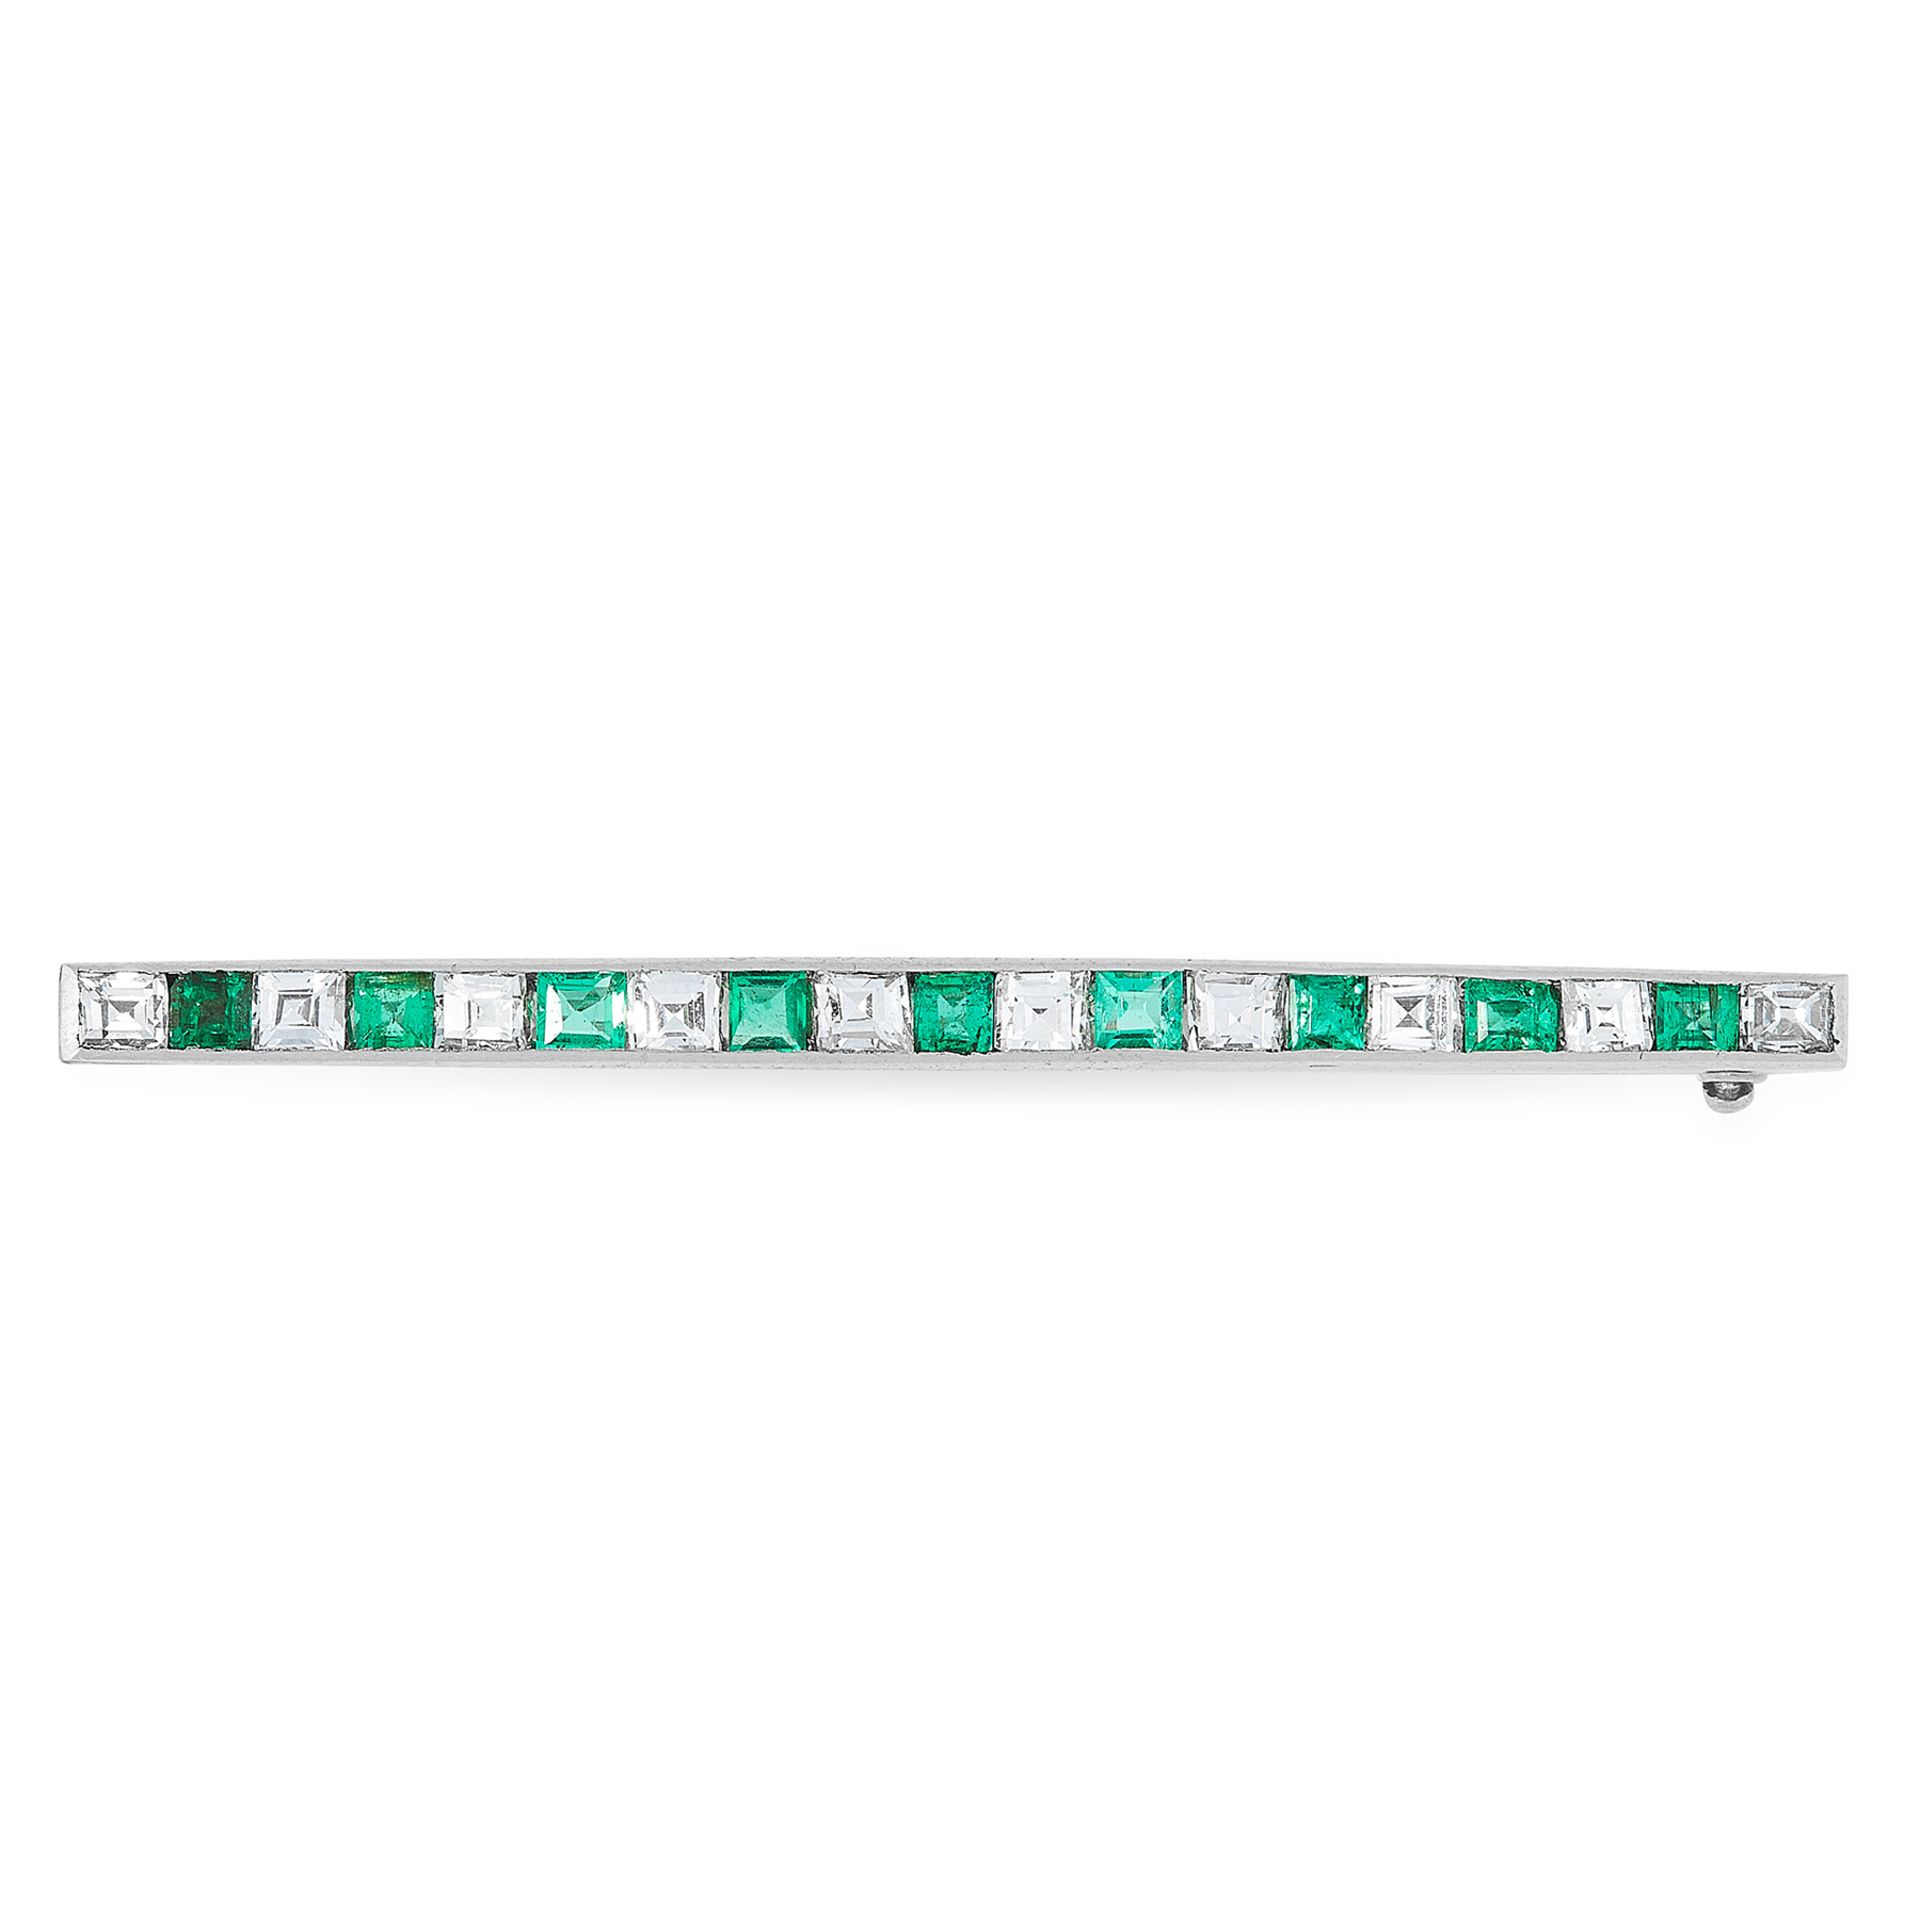 AN EMERALD AND DIAMOND BAR BROOCH, EARLY 20TH CENTURY comprising a single row of alternating step